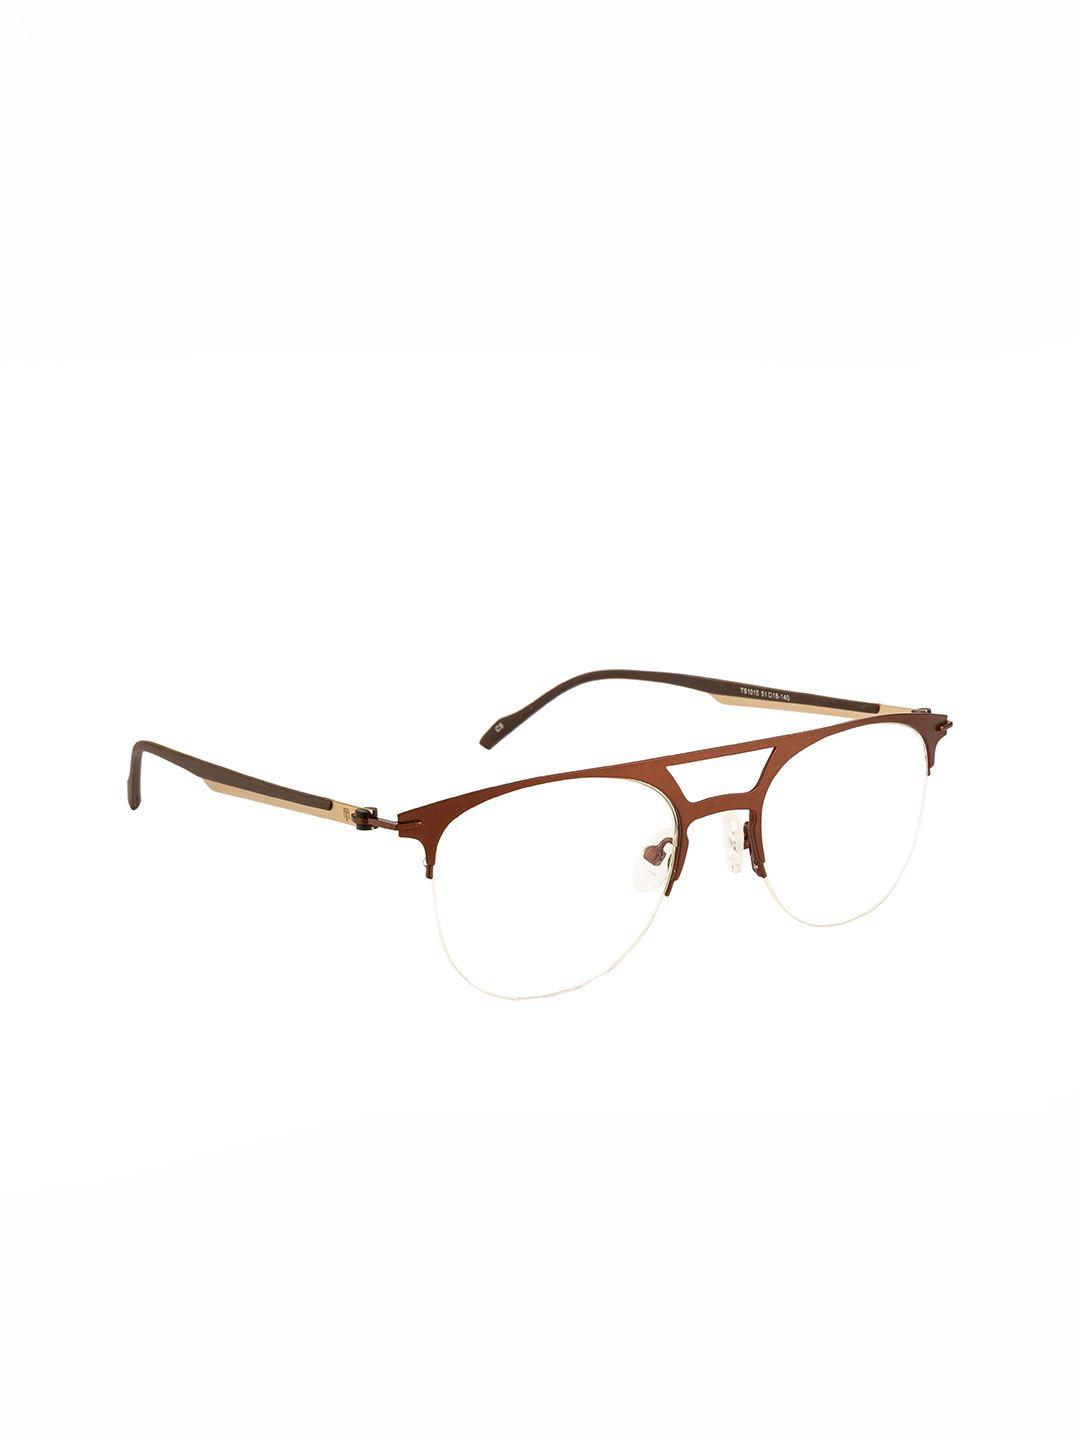 ted smith unisex brown & gold-toned half rim aviator frames